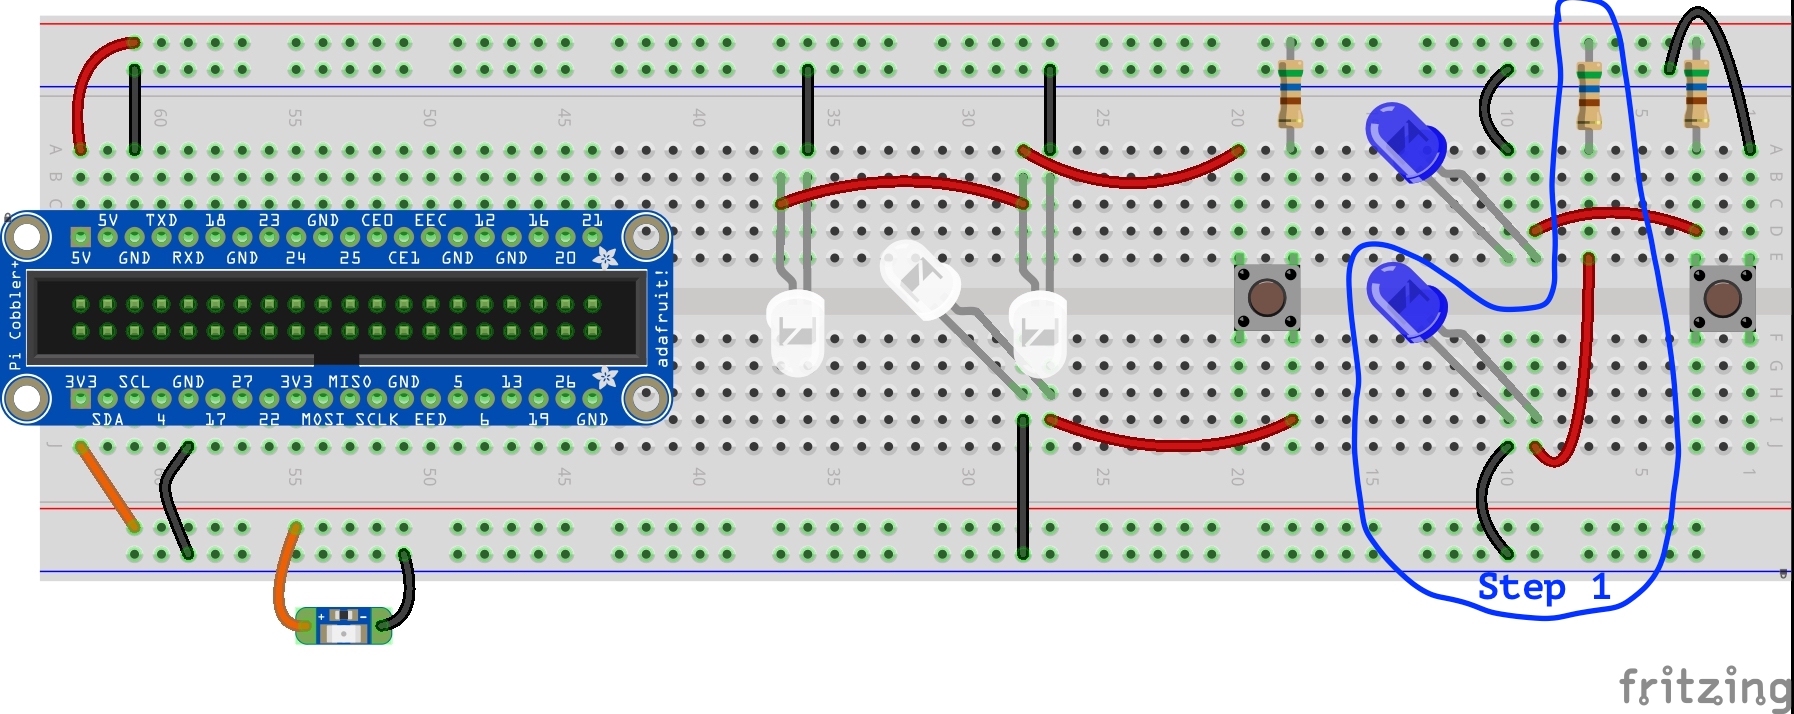 A diagram of a breadboard wired with five LEDs, three resistors, and two momentary switches illustrating the instructions listed in step 1.